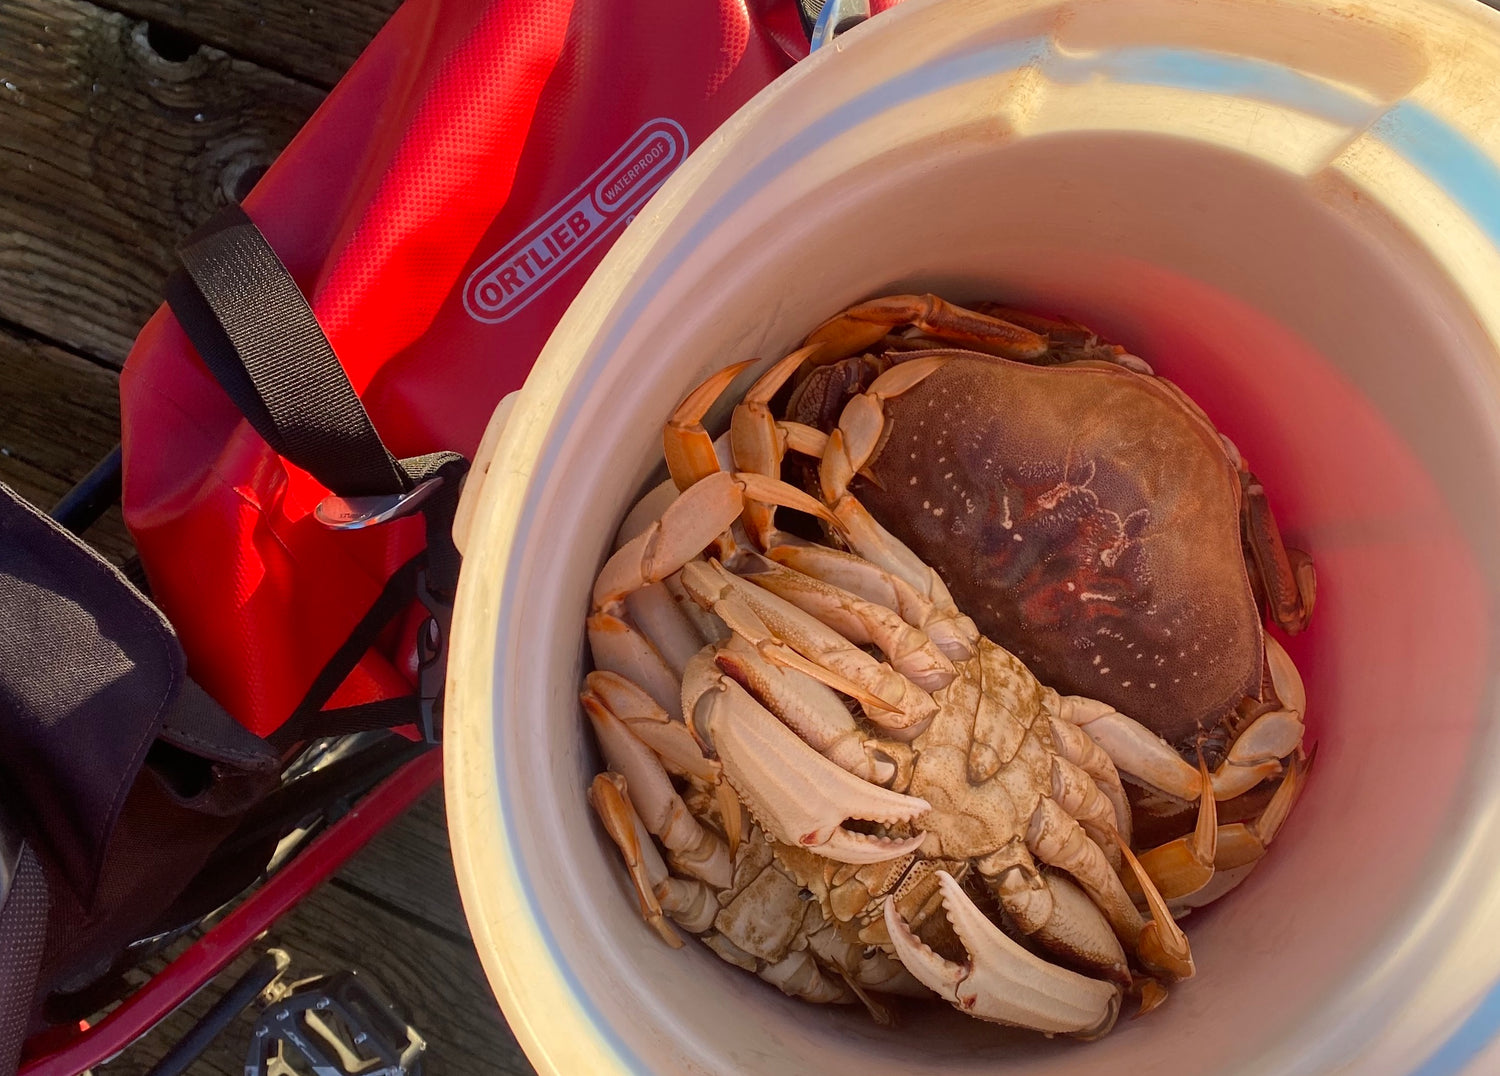 Picking up crab on an ebike with Ortlieb bags